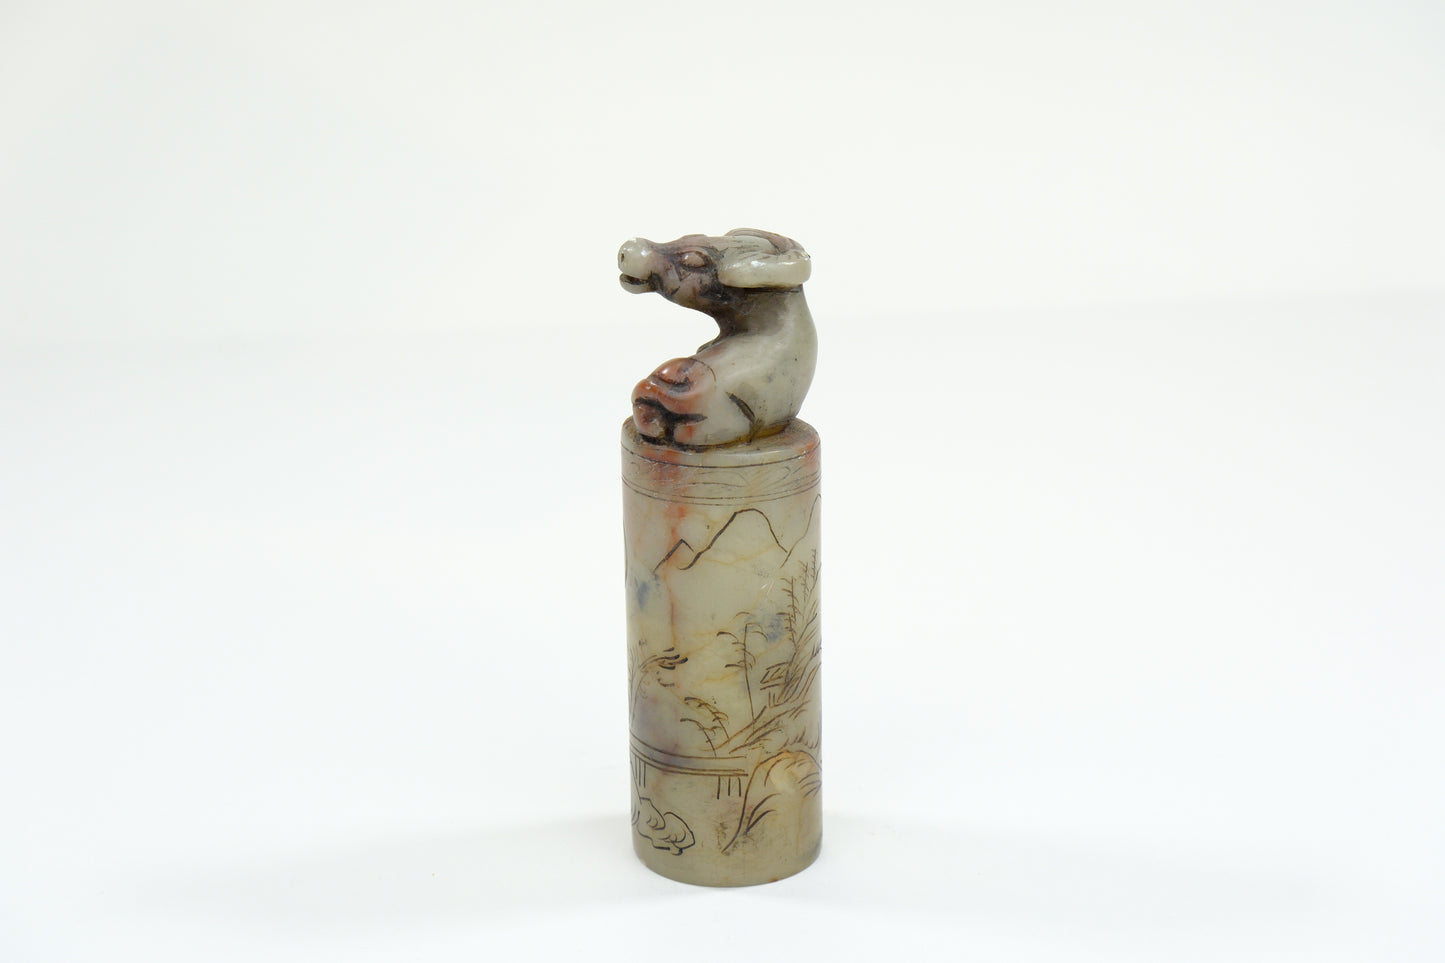 Vintage Chinese Handcarved Inkan Marble Stamp Zodiac Bull 3”